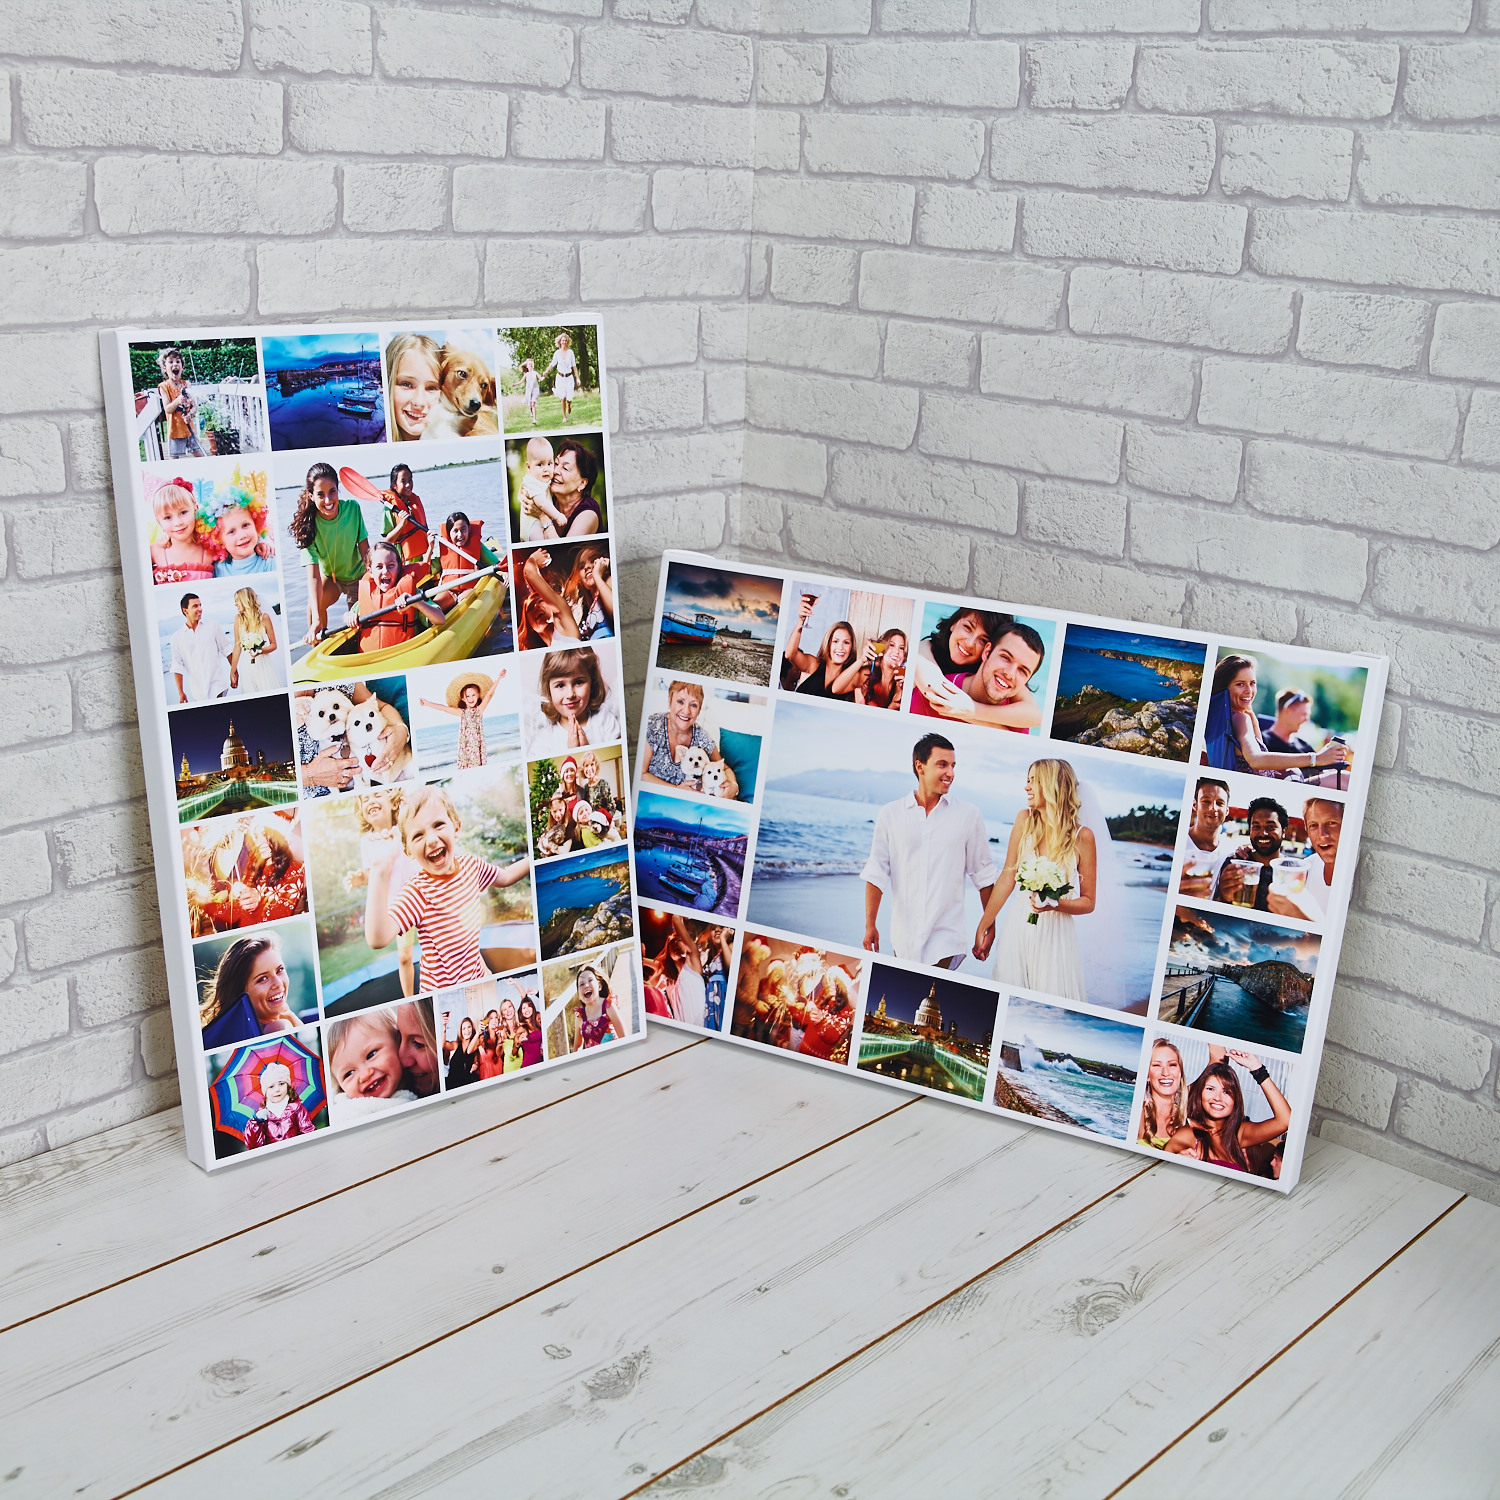 Fantastic Personalised Photo Collage Printed on to a framed canvas ready to hang | eBay